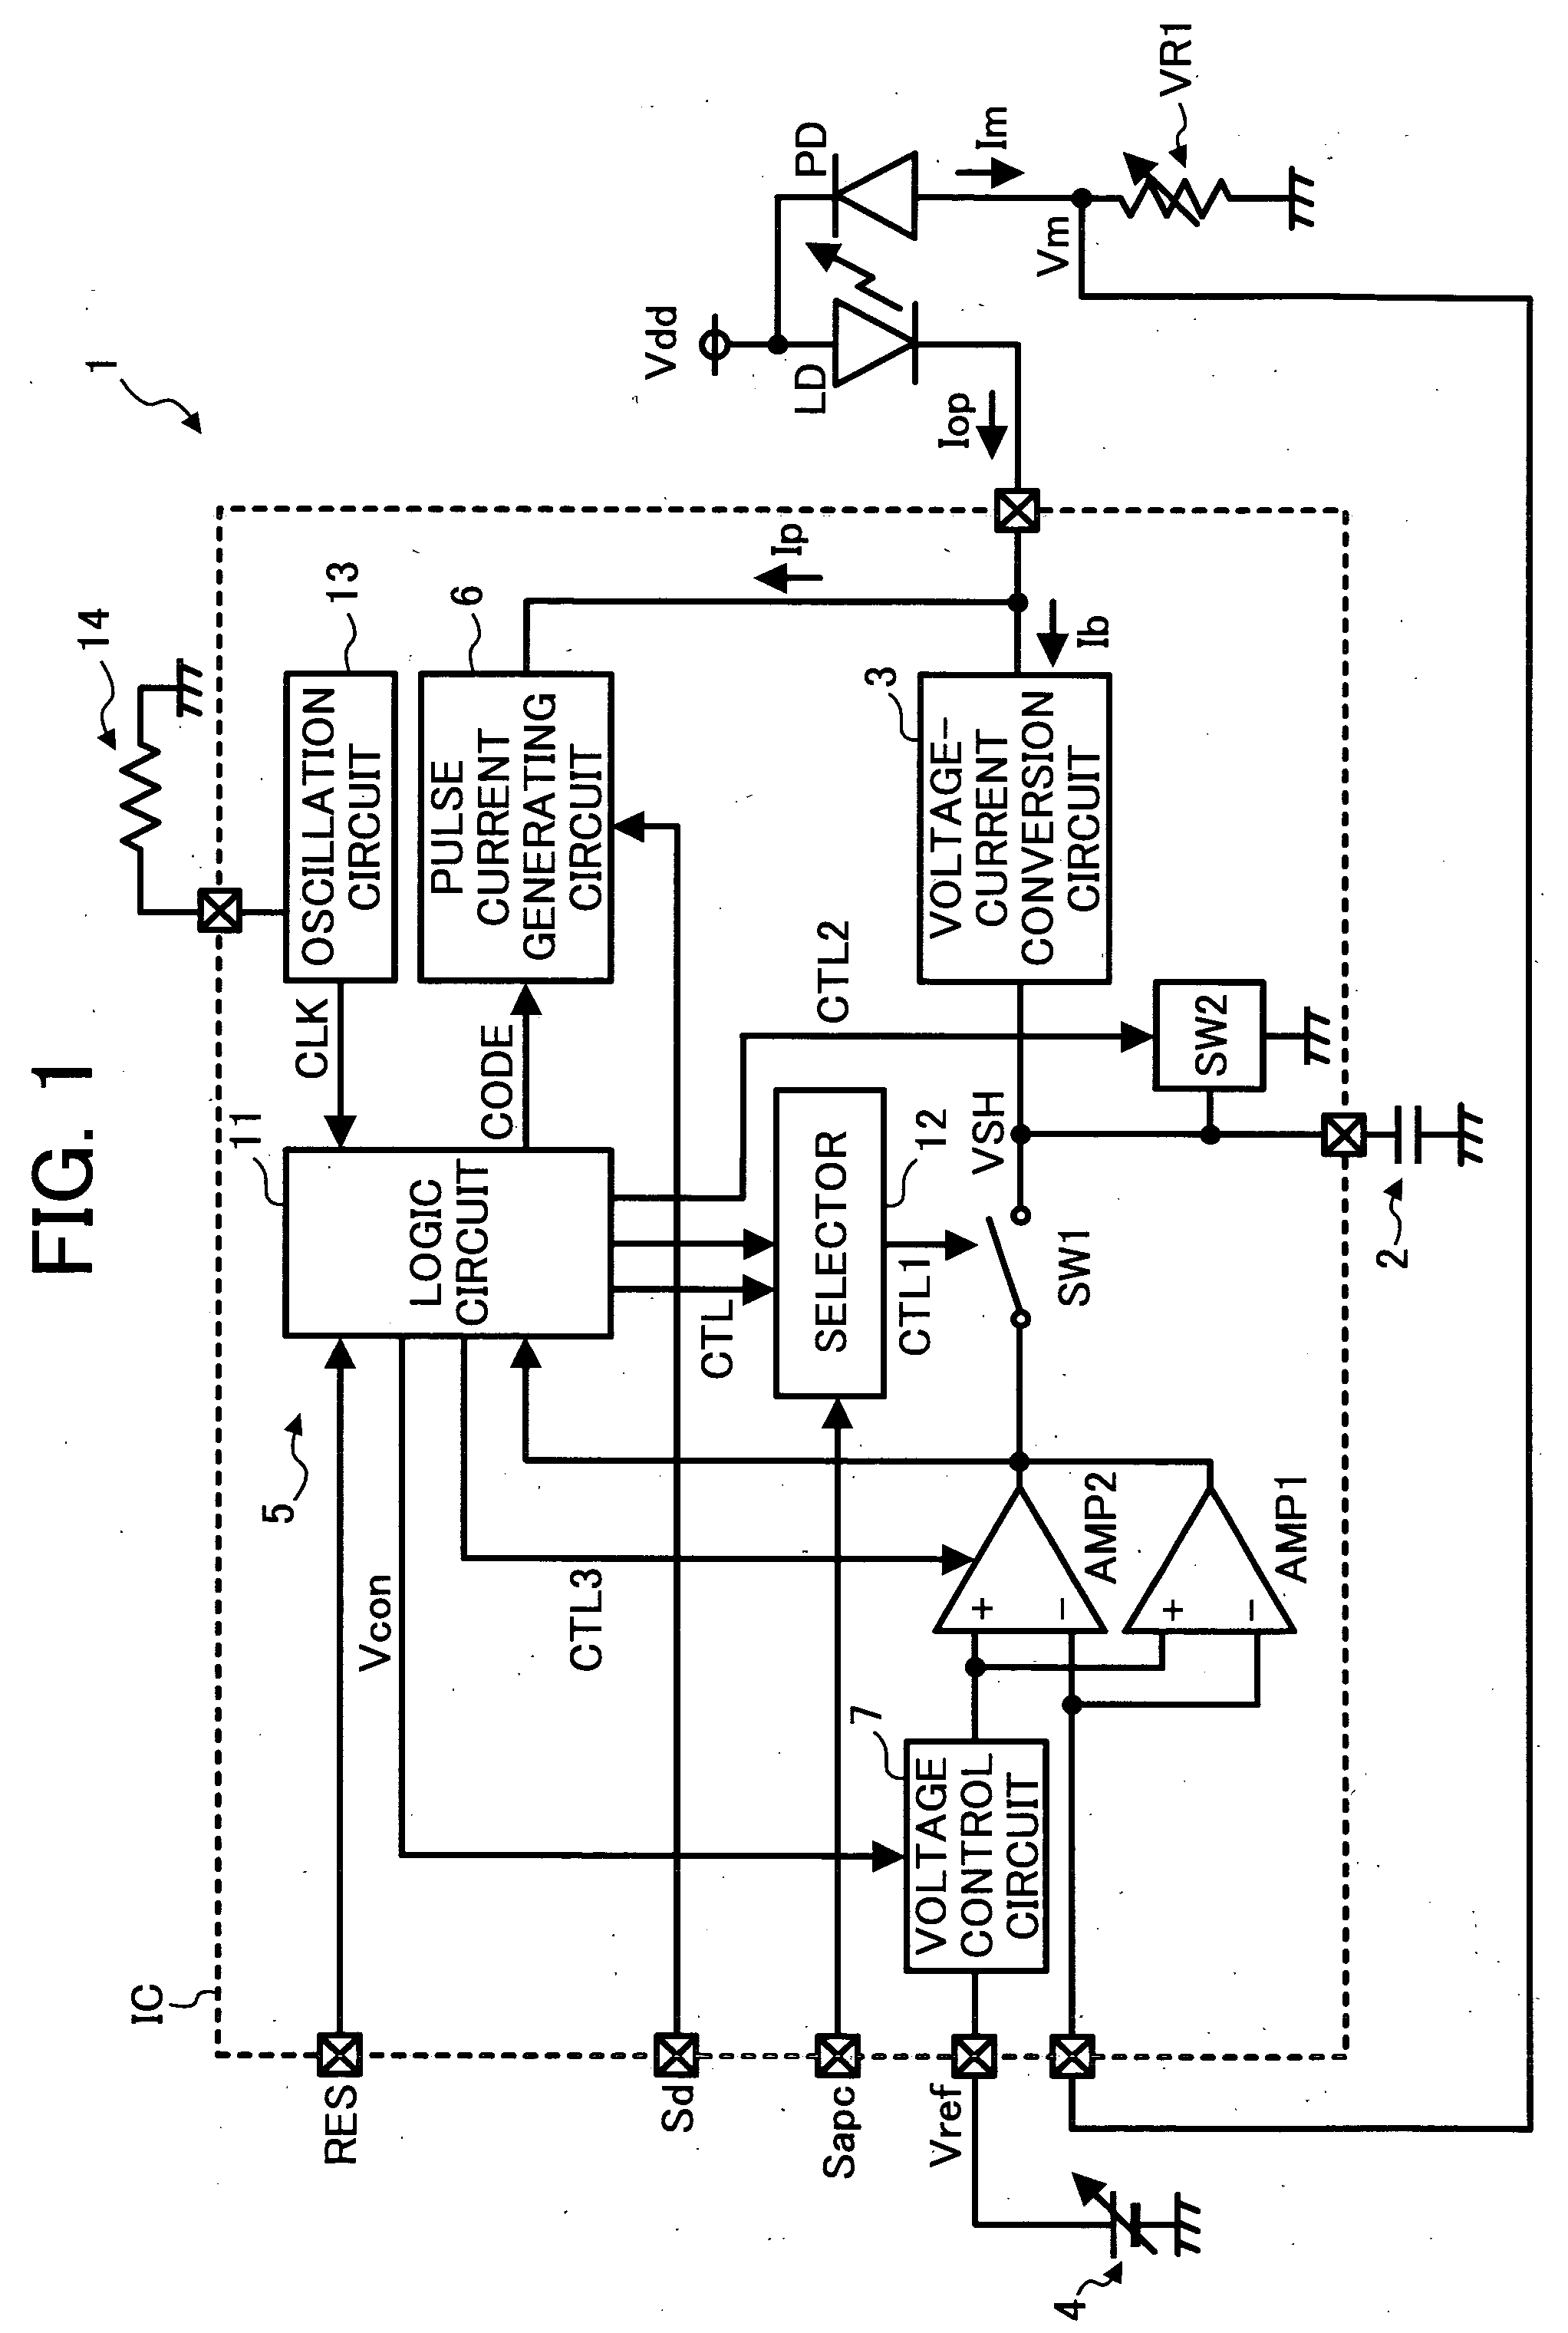 Method and apparatus for semiconductor laser driving capable of stably generating consistent optical pulse widths of laser diodes